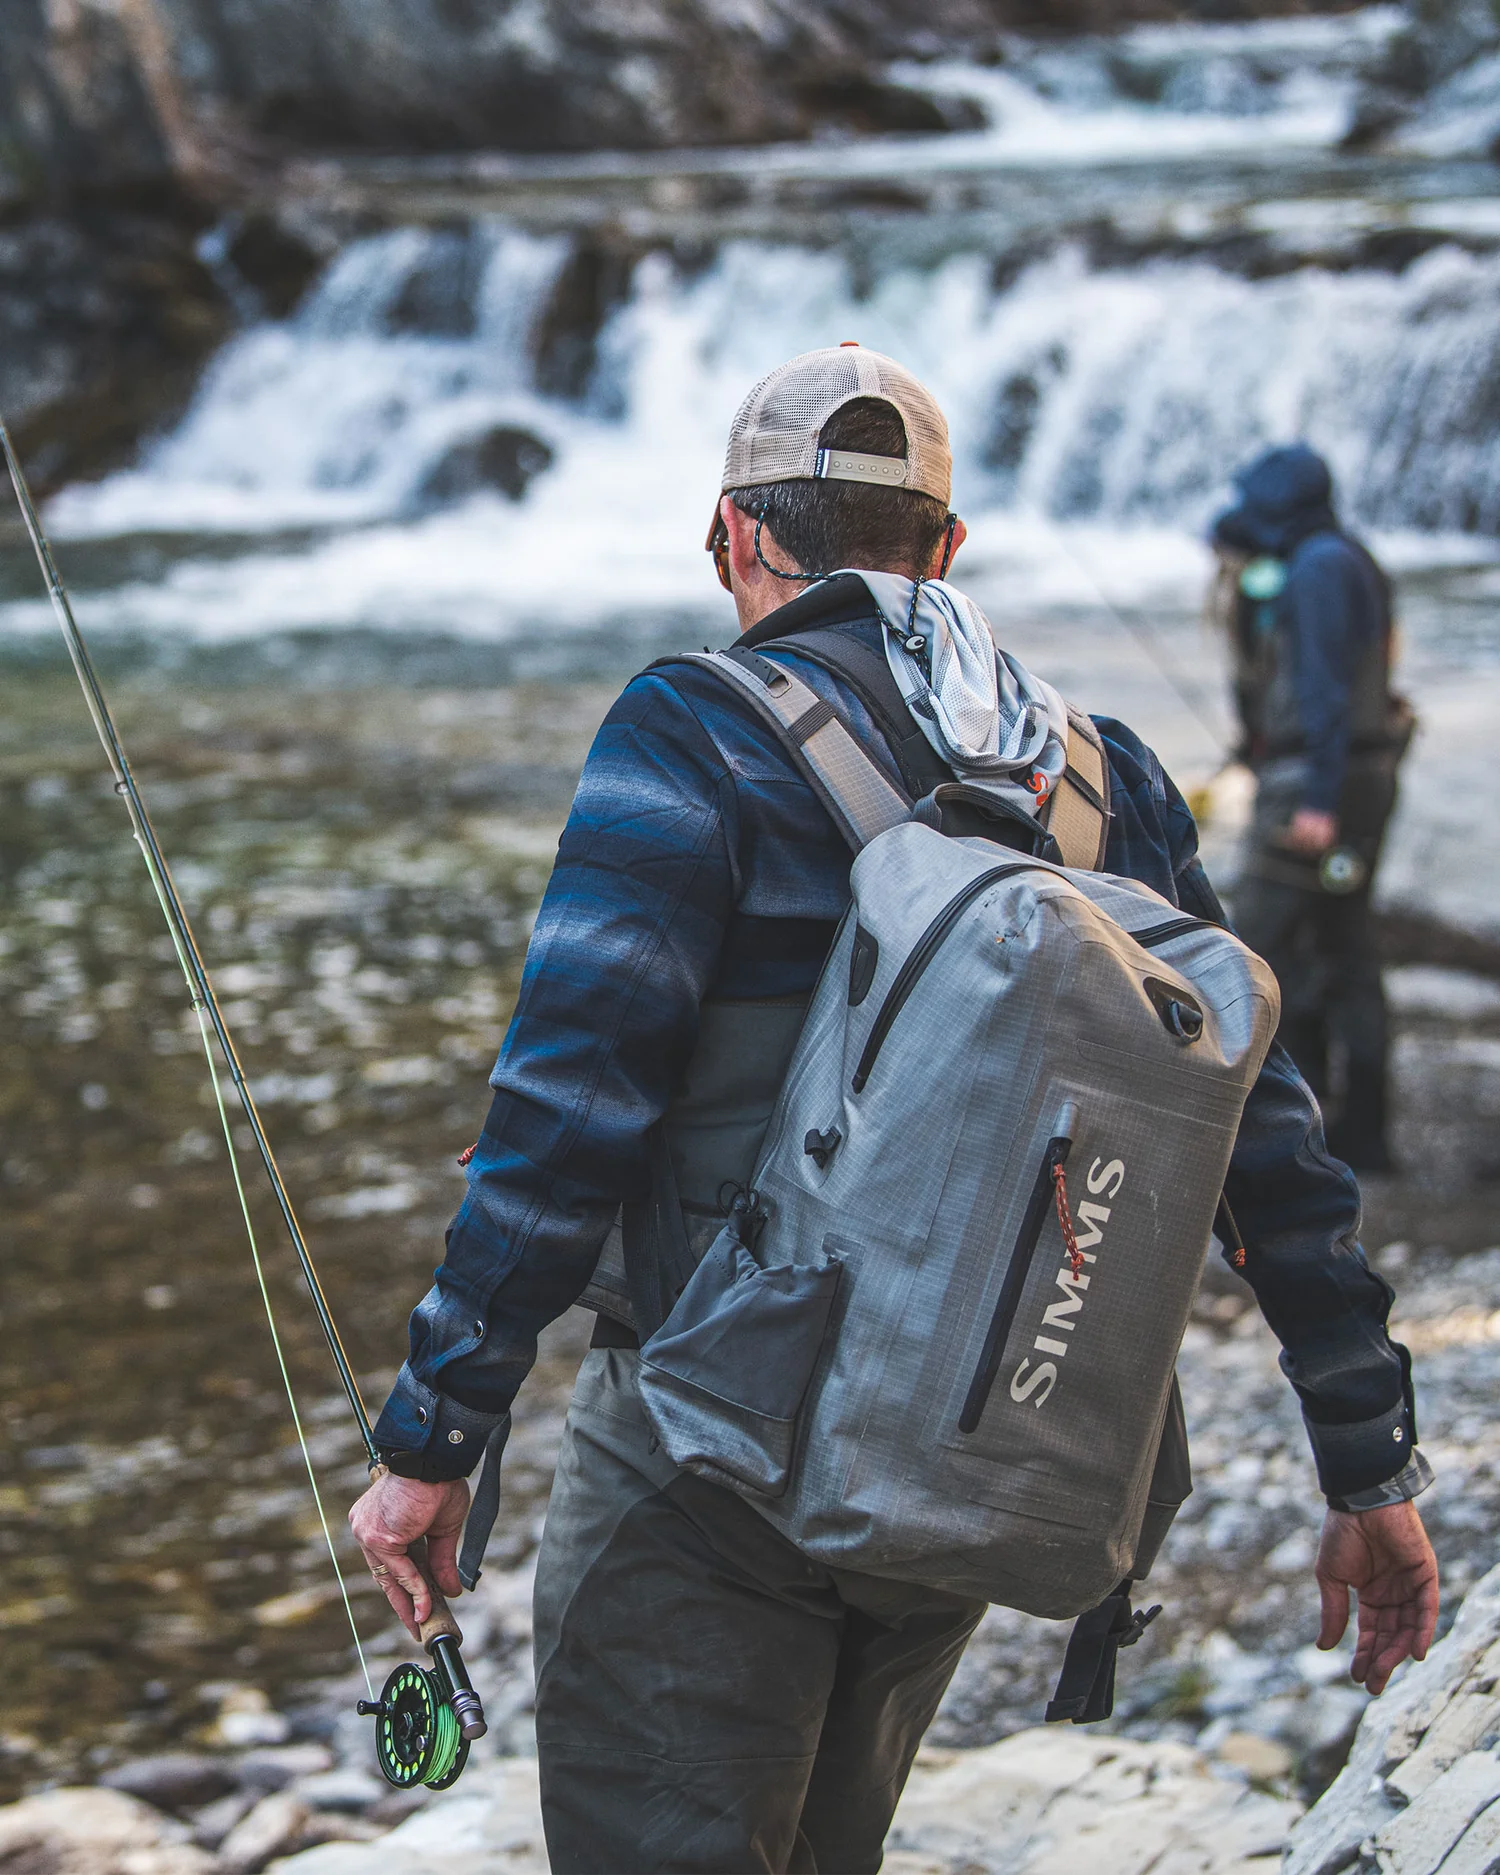 The New Simms Dry Creek Rolltop Waterproof Fishing Pack Review – Manic  Tackle Project